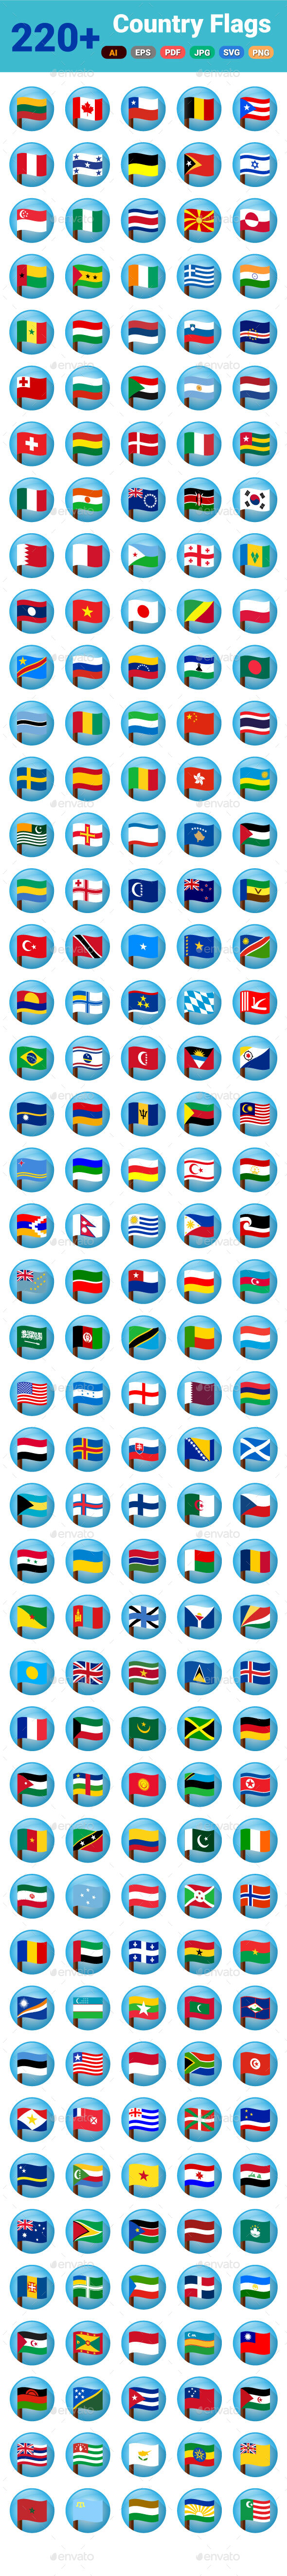 World Countries Flags Coloured Vector Icons